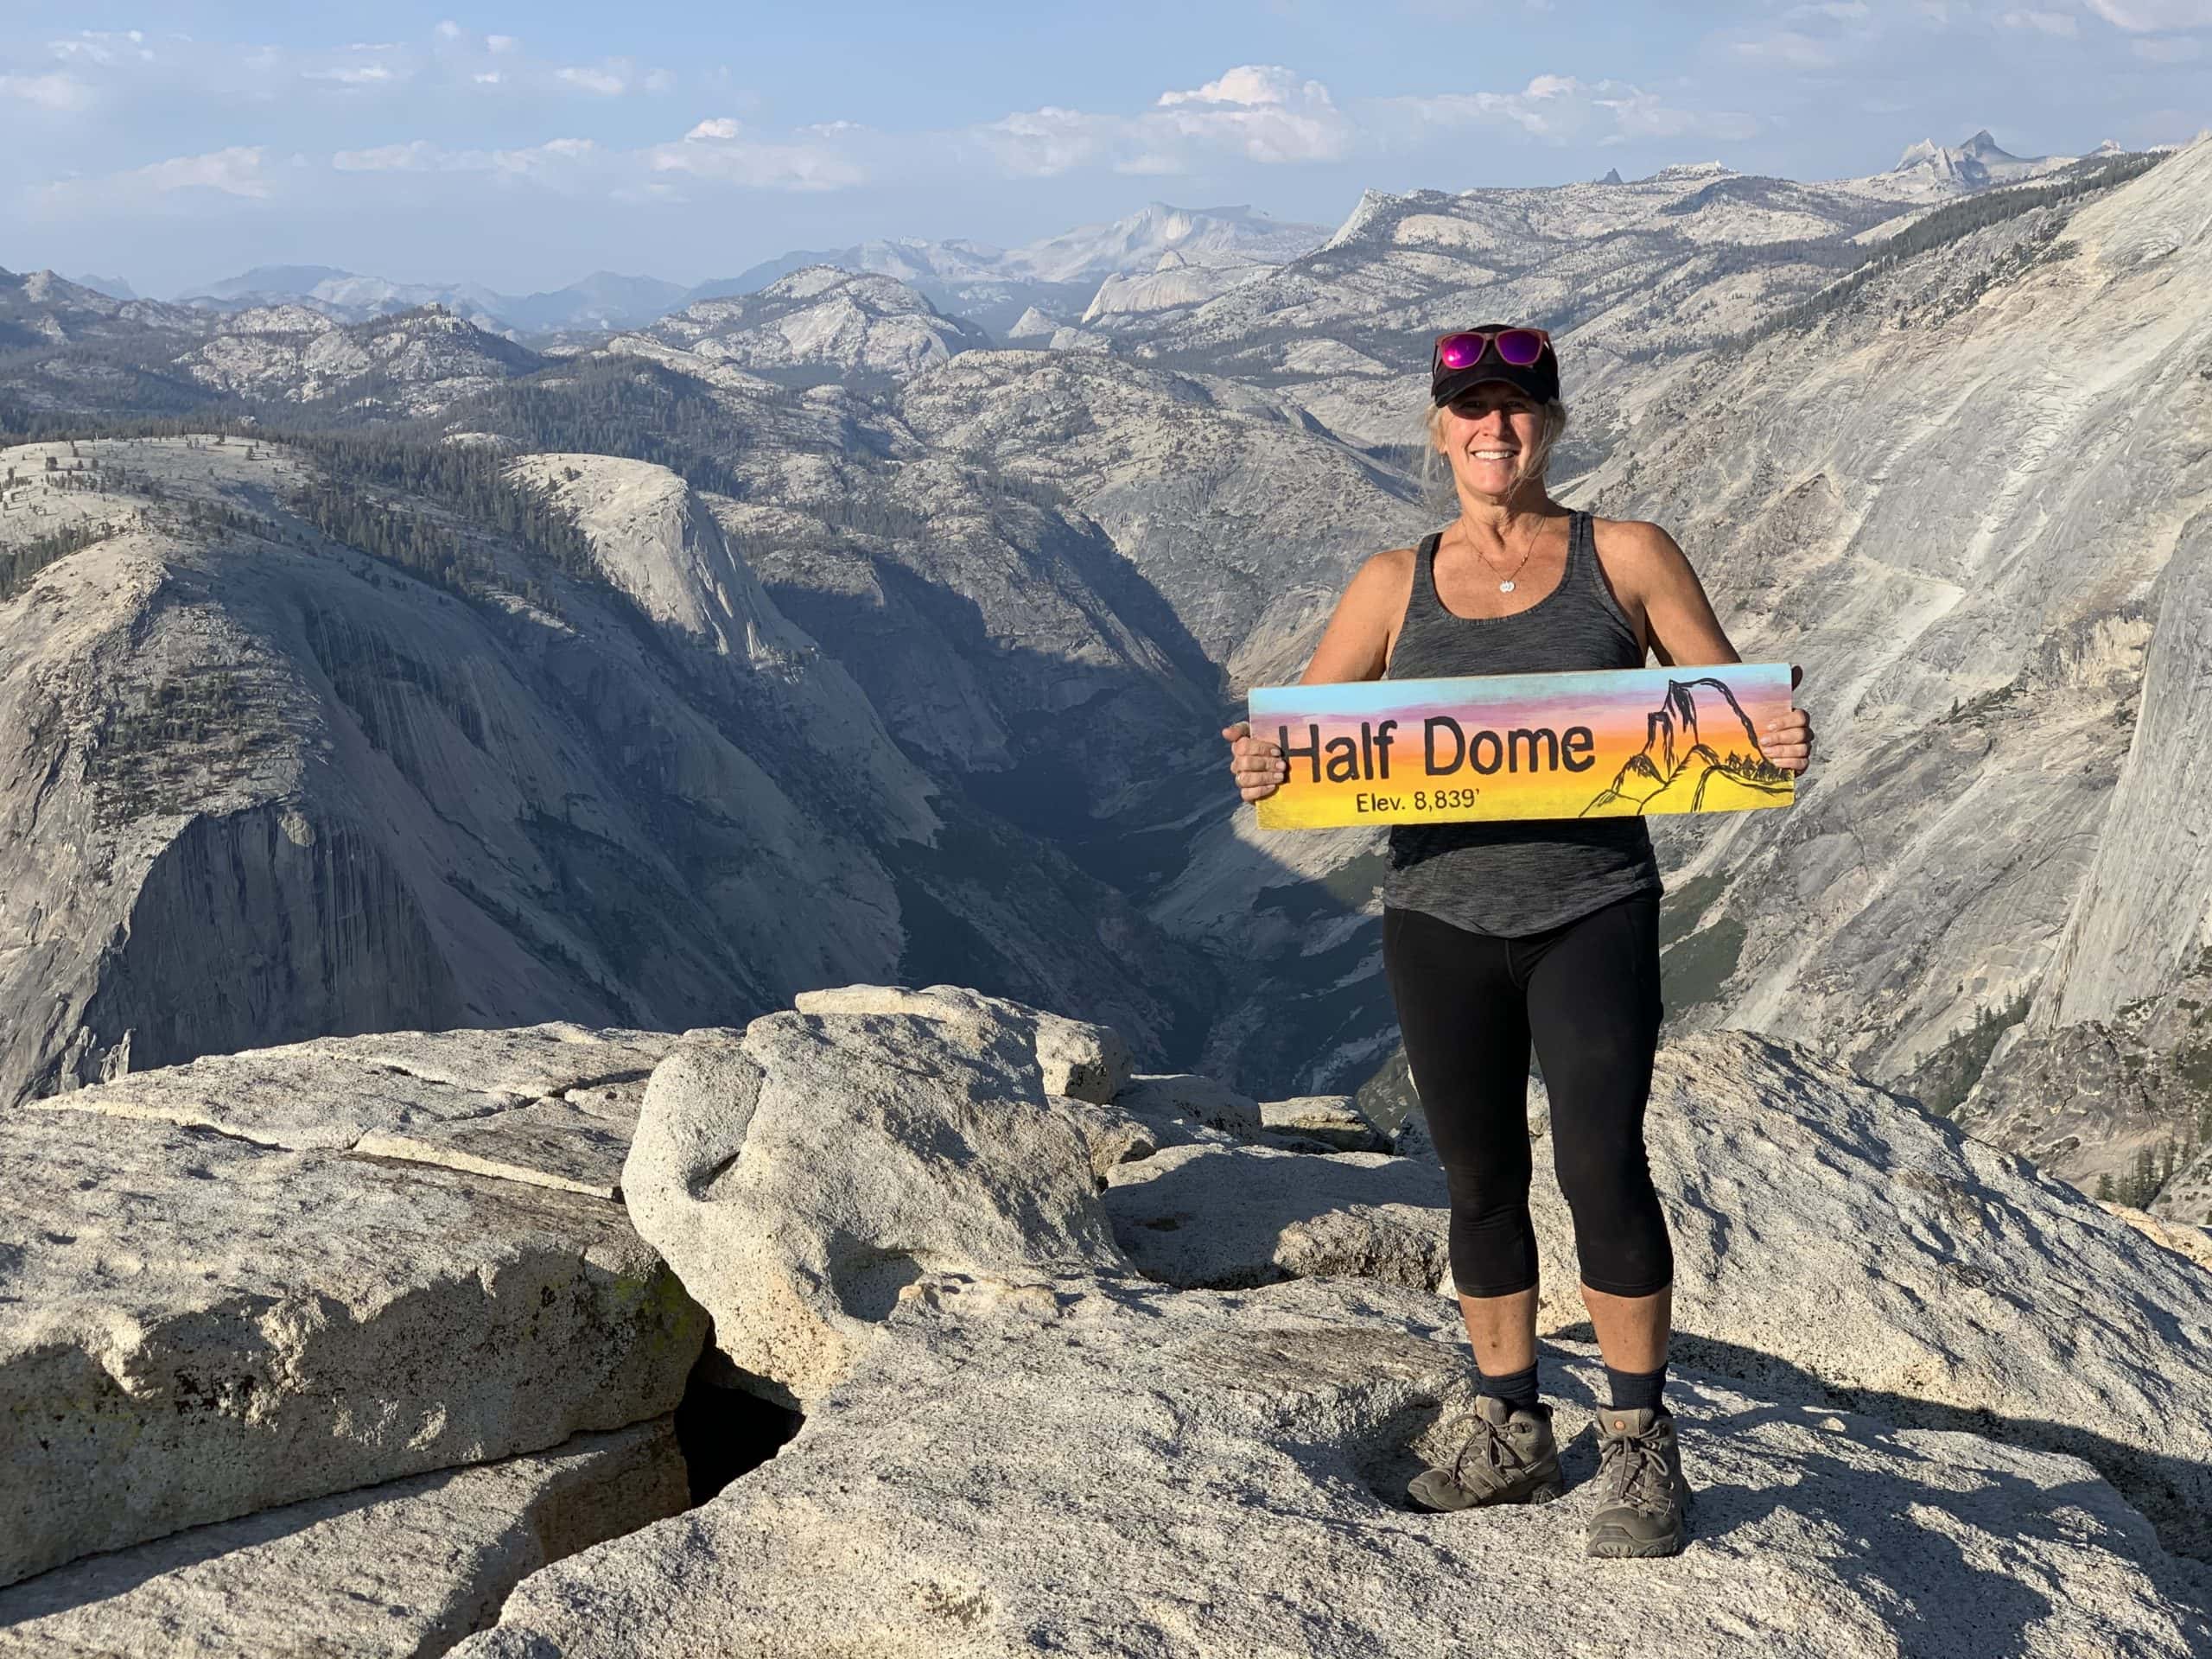 Guided Backpacking Trip to Yosemite's Half Dome - Adventure Out